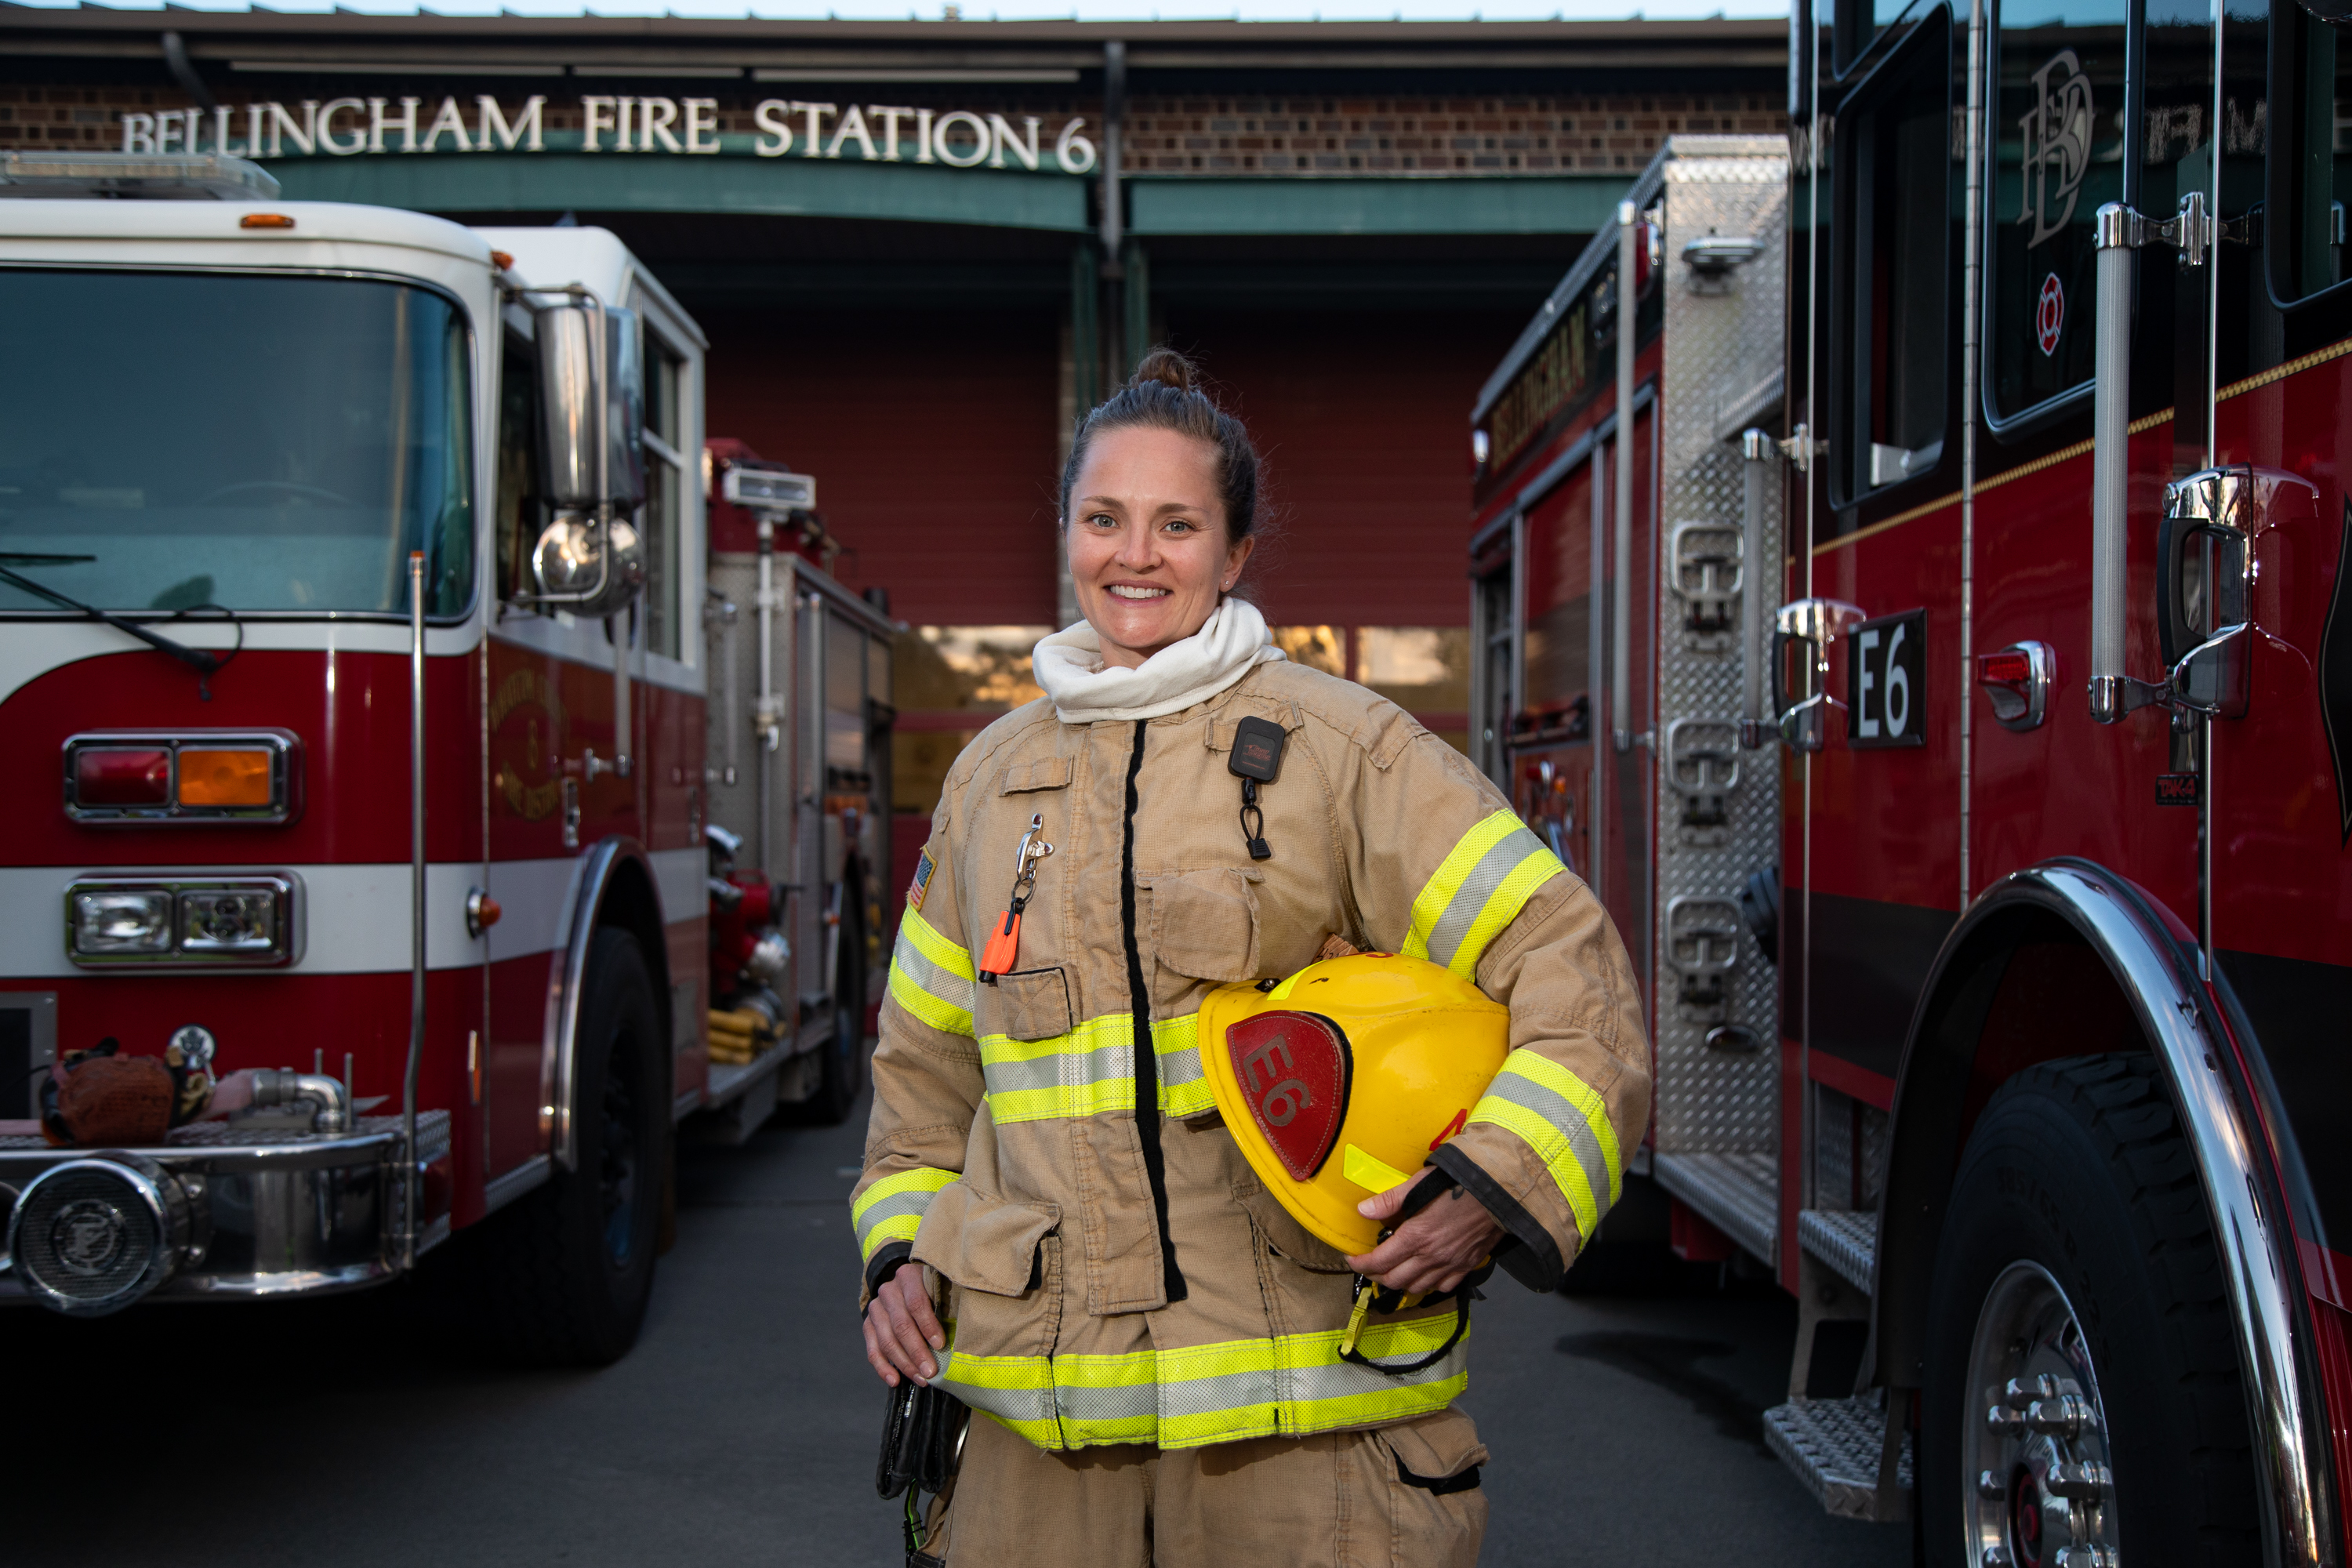 Rebecca Pederson became a firefighter with the Bellingham Fire Department about three years ago after a 13-year teaching career. Pederson found the job change 